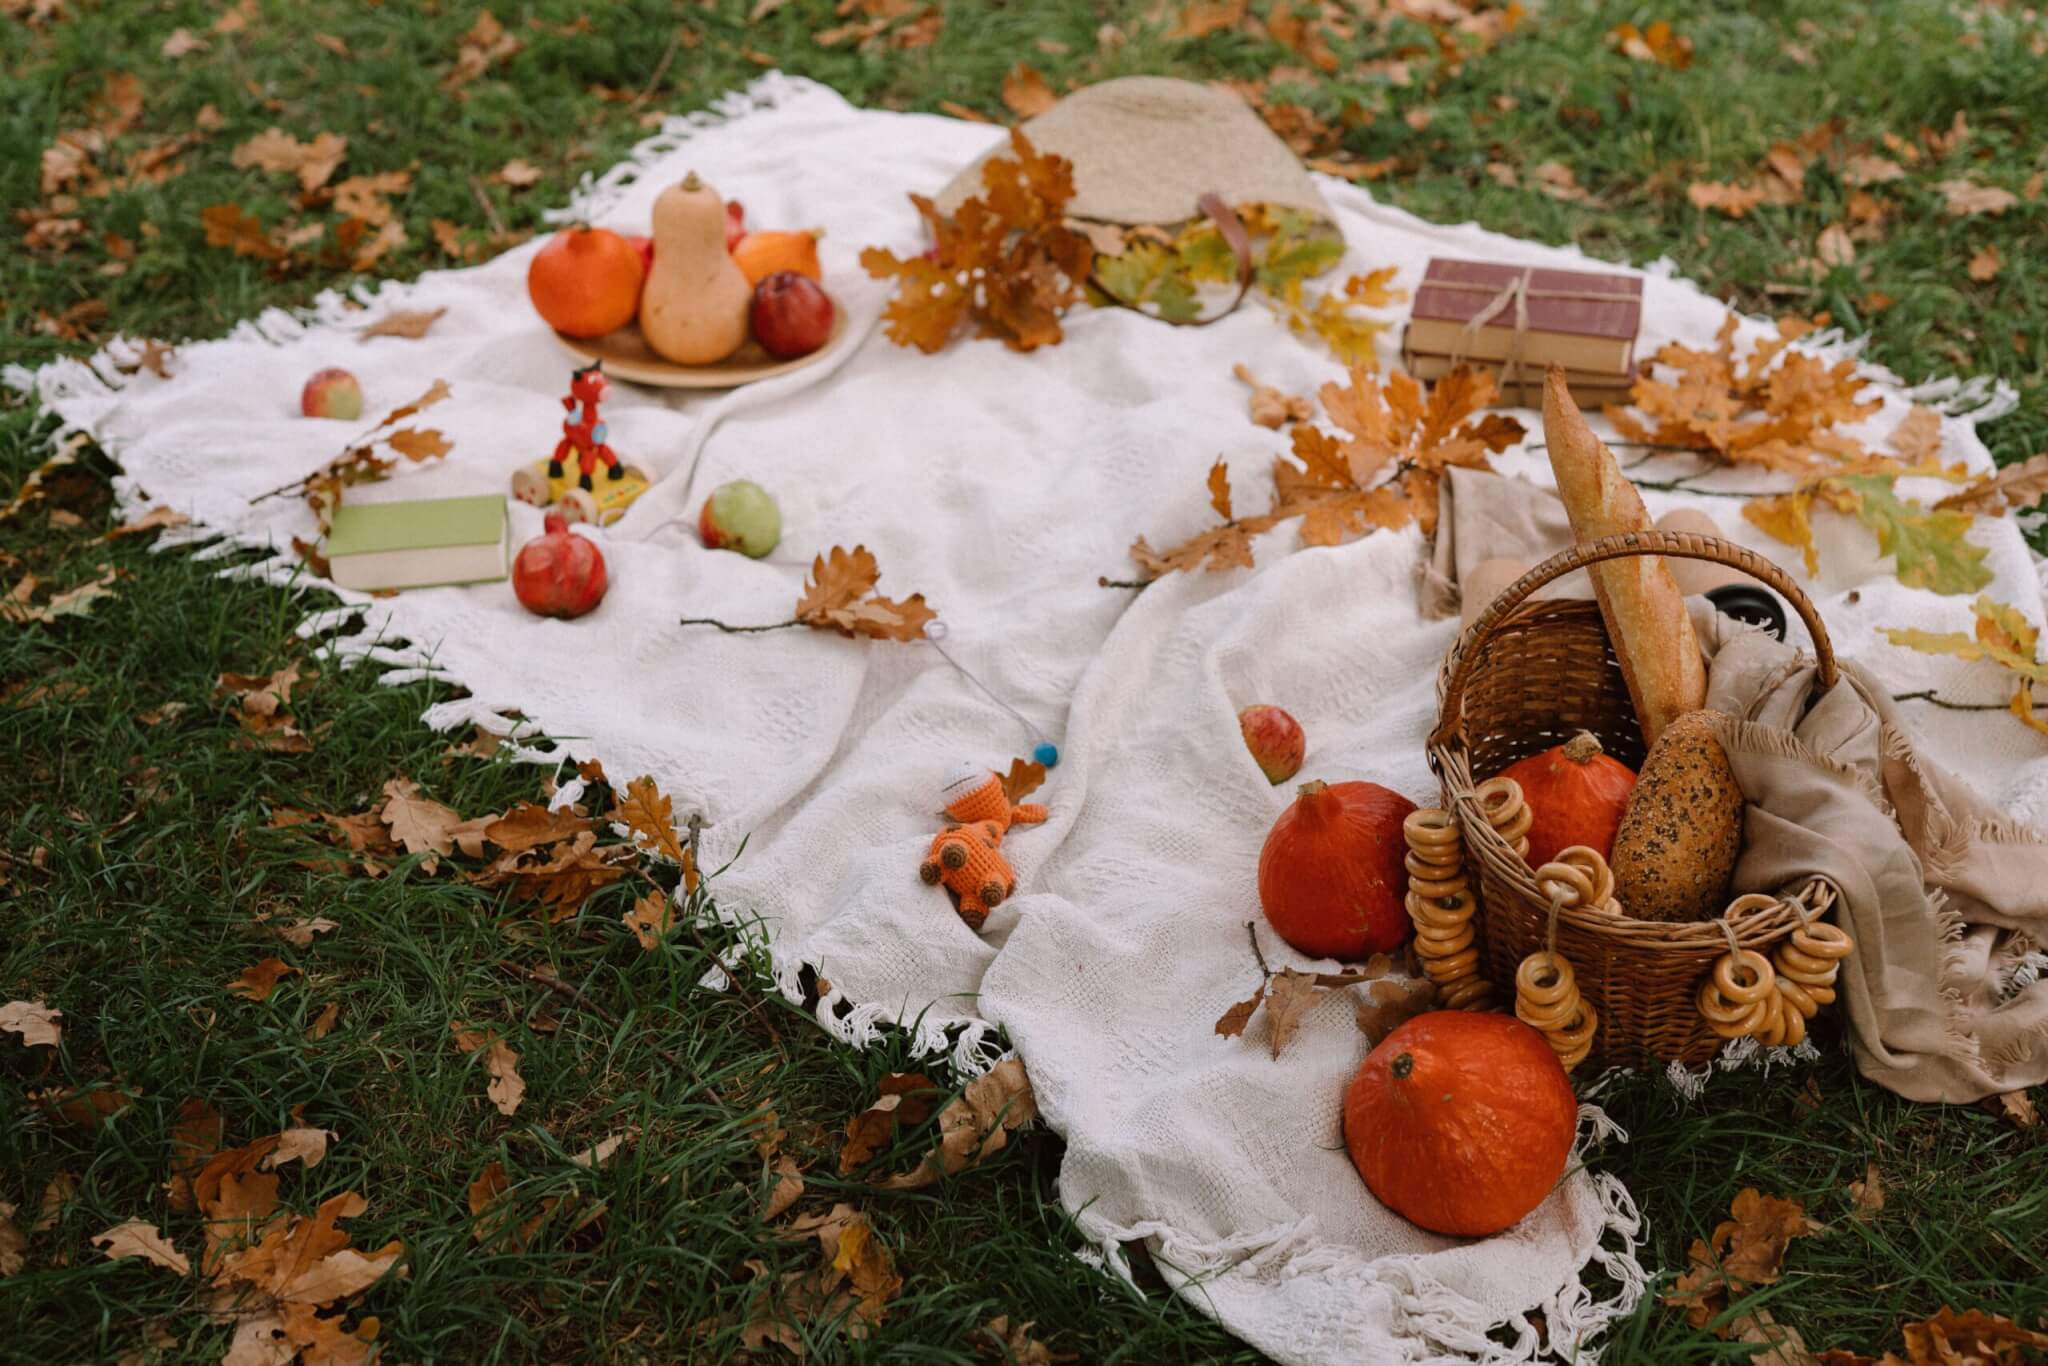 Autumn composition with assorted pumpkins and bread in basket placed on plaid on grassy lawn